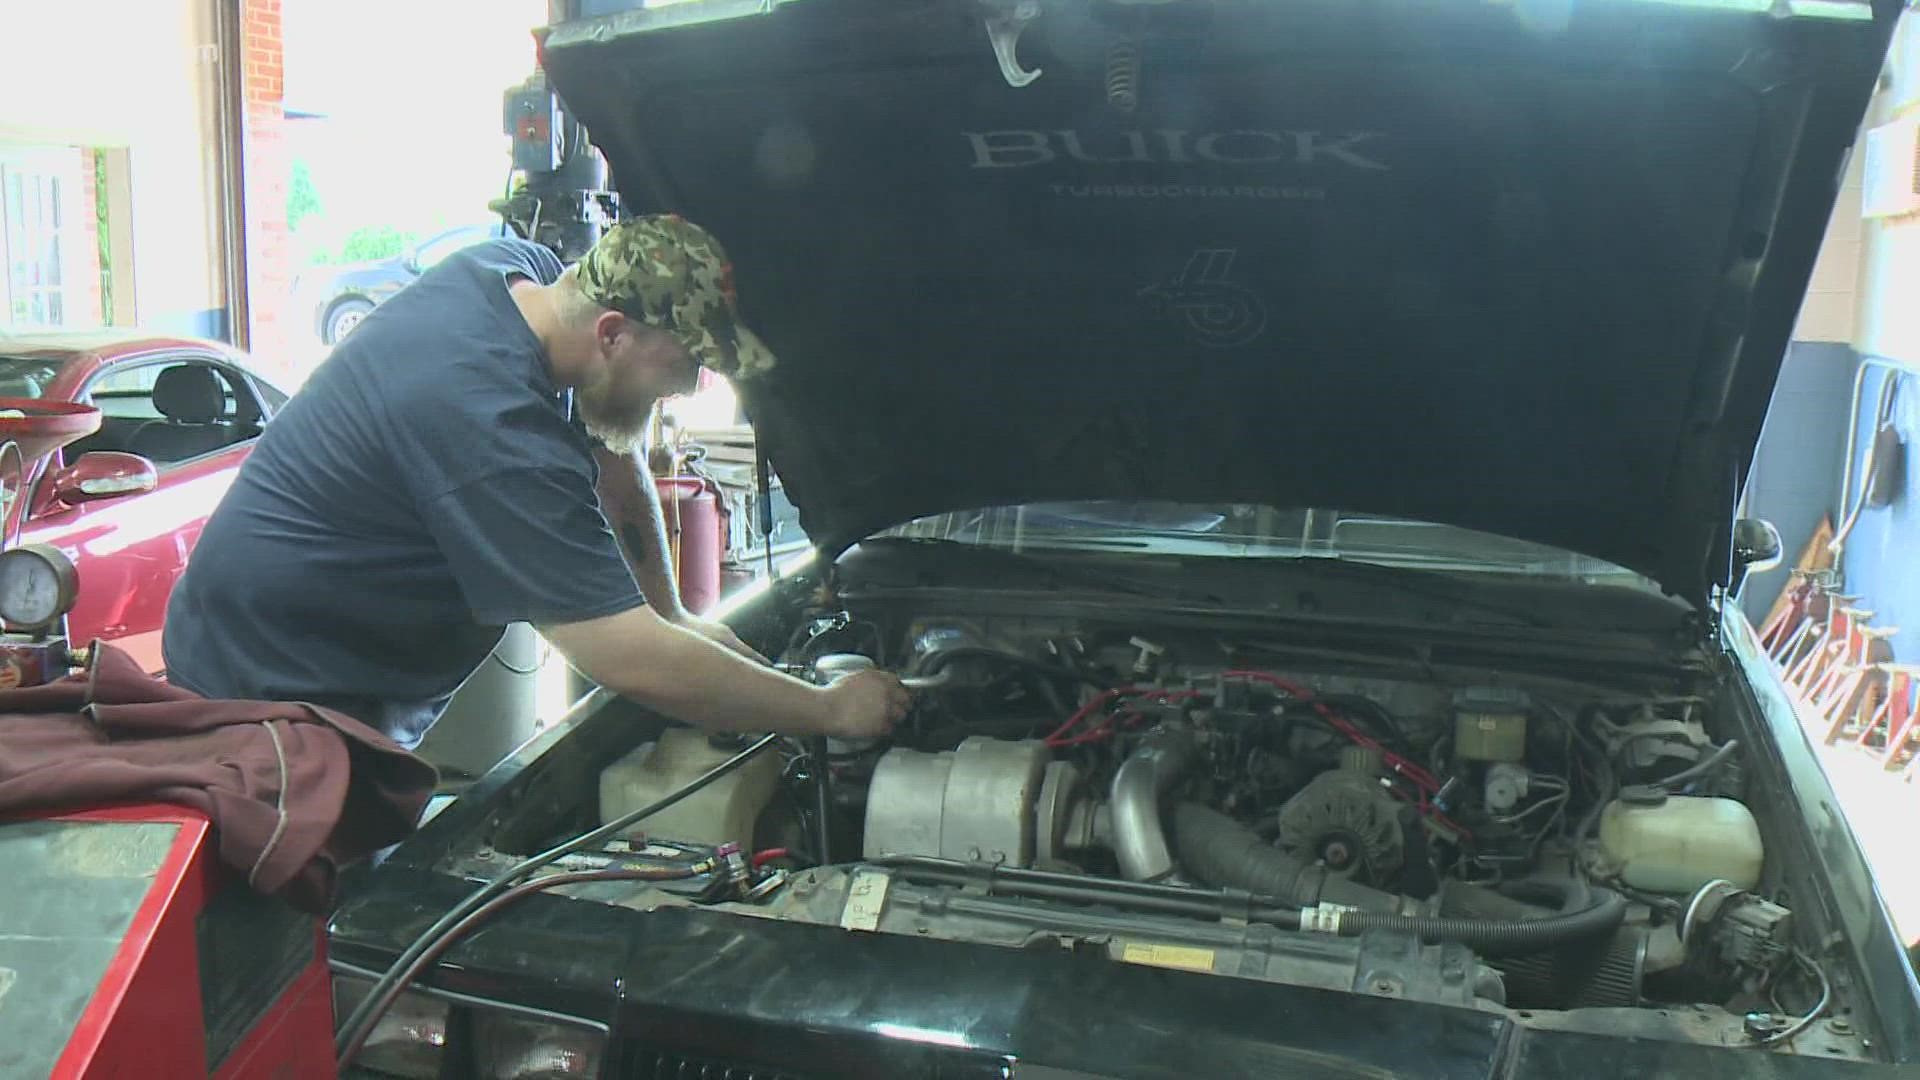 Triple AAA says that car breakdowns tend to spike on hot days.